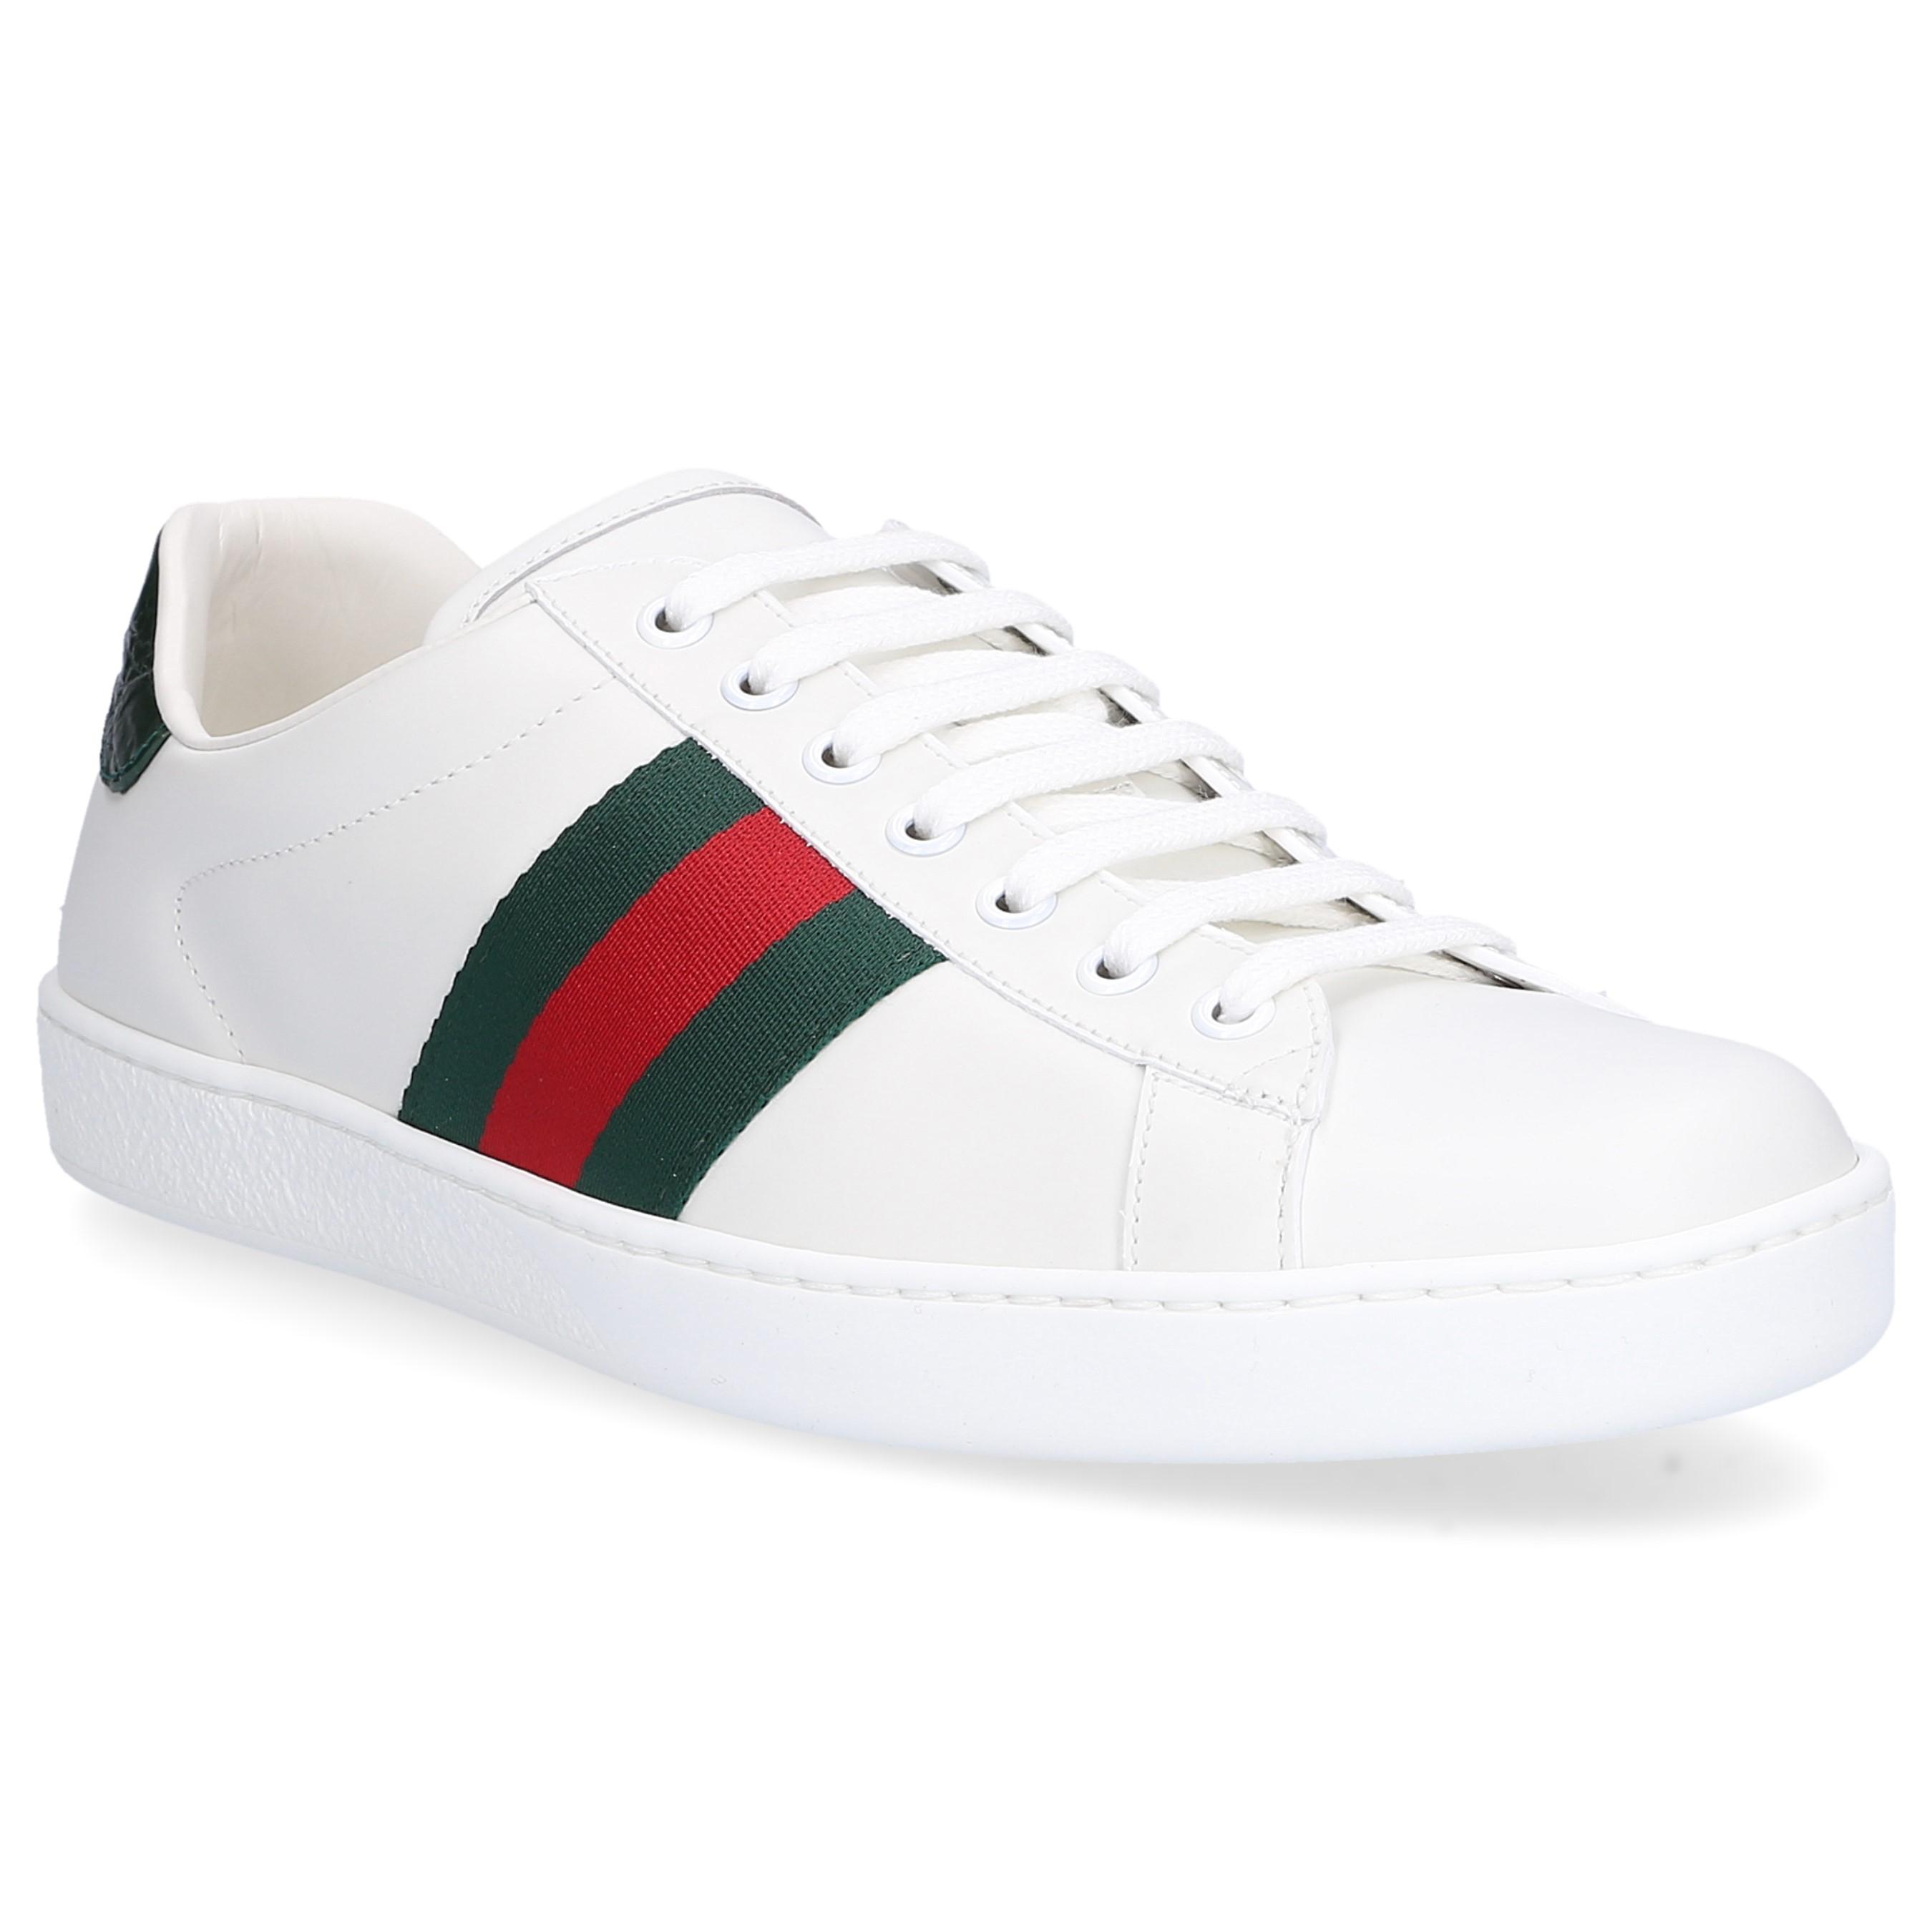 white shoes with red and green stripes